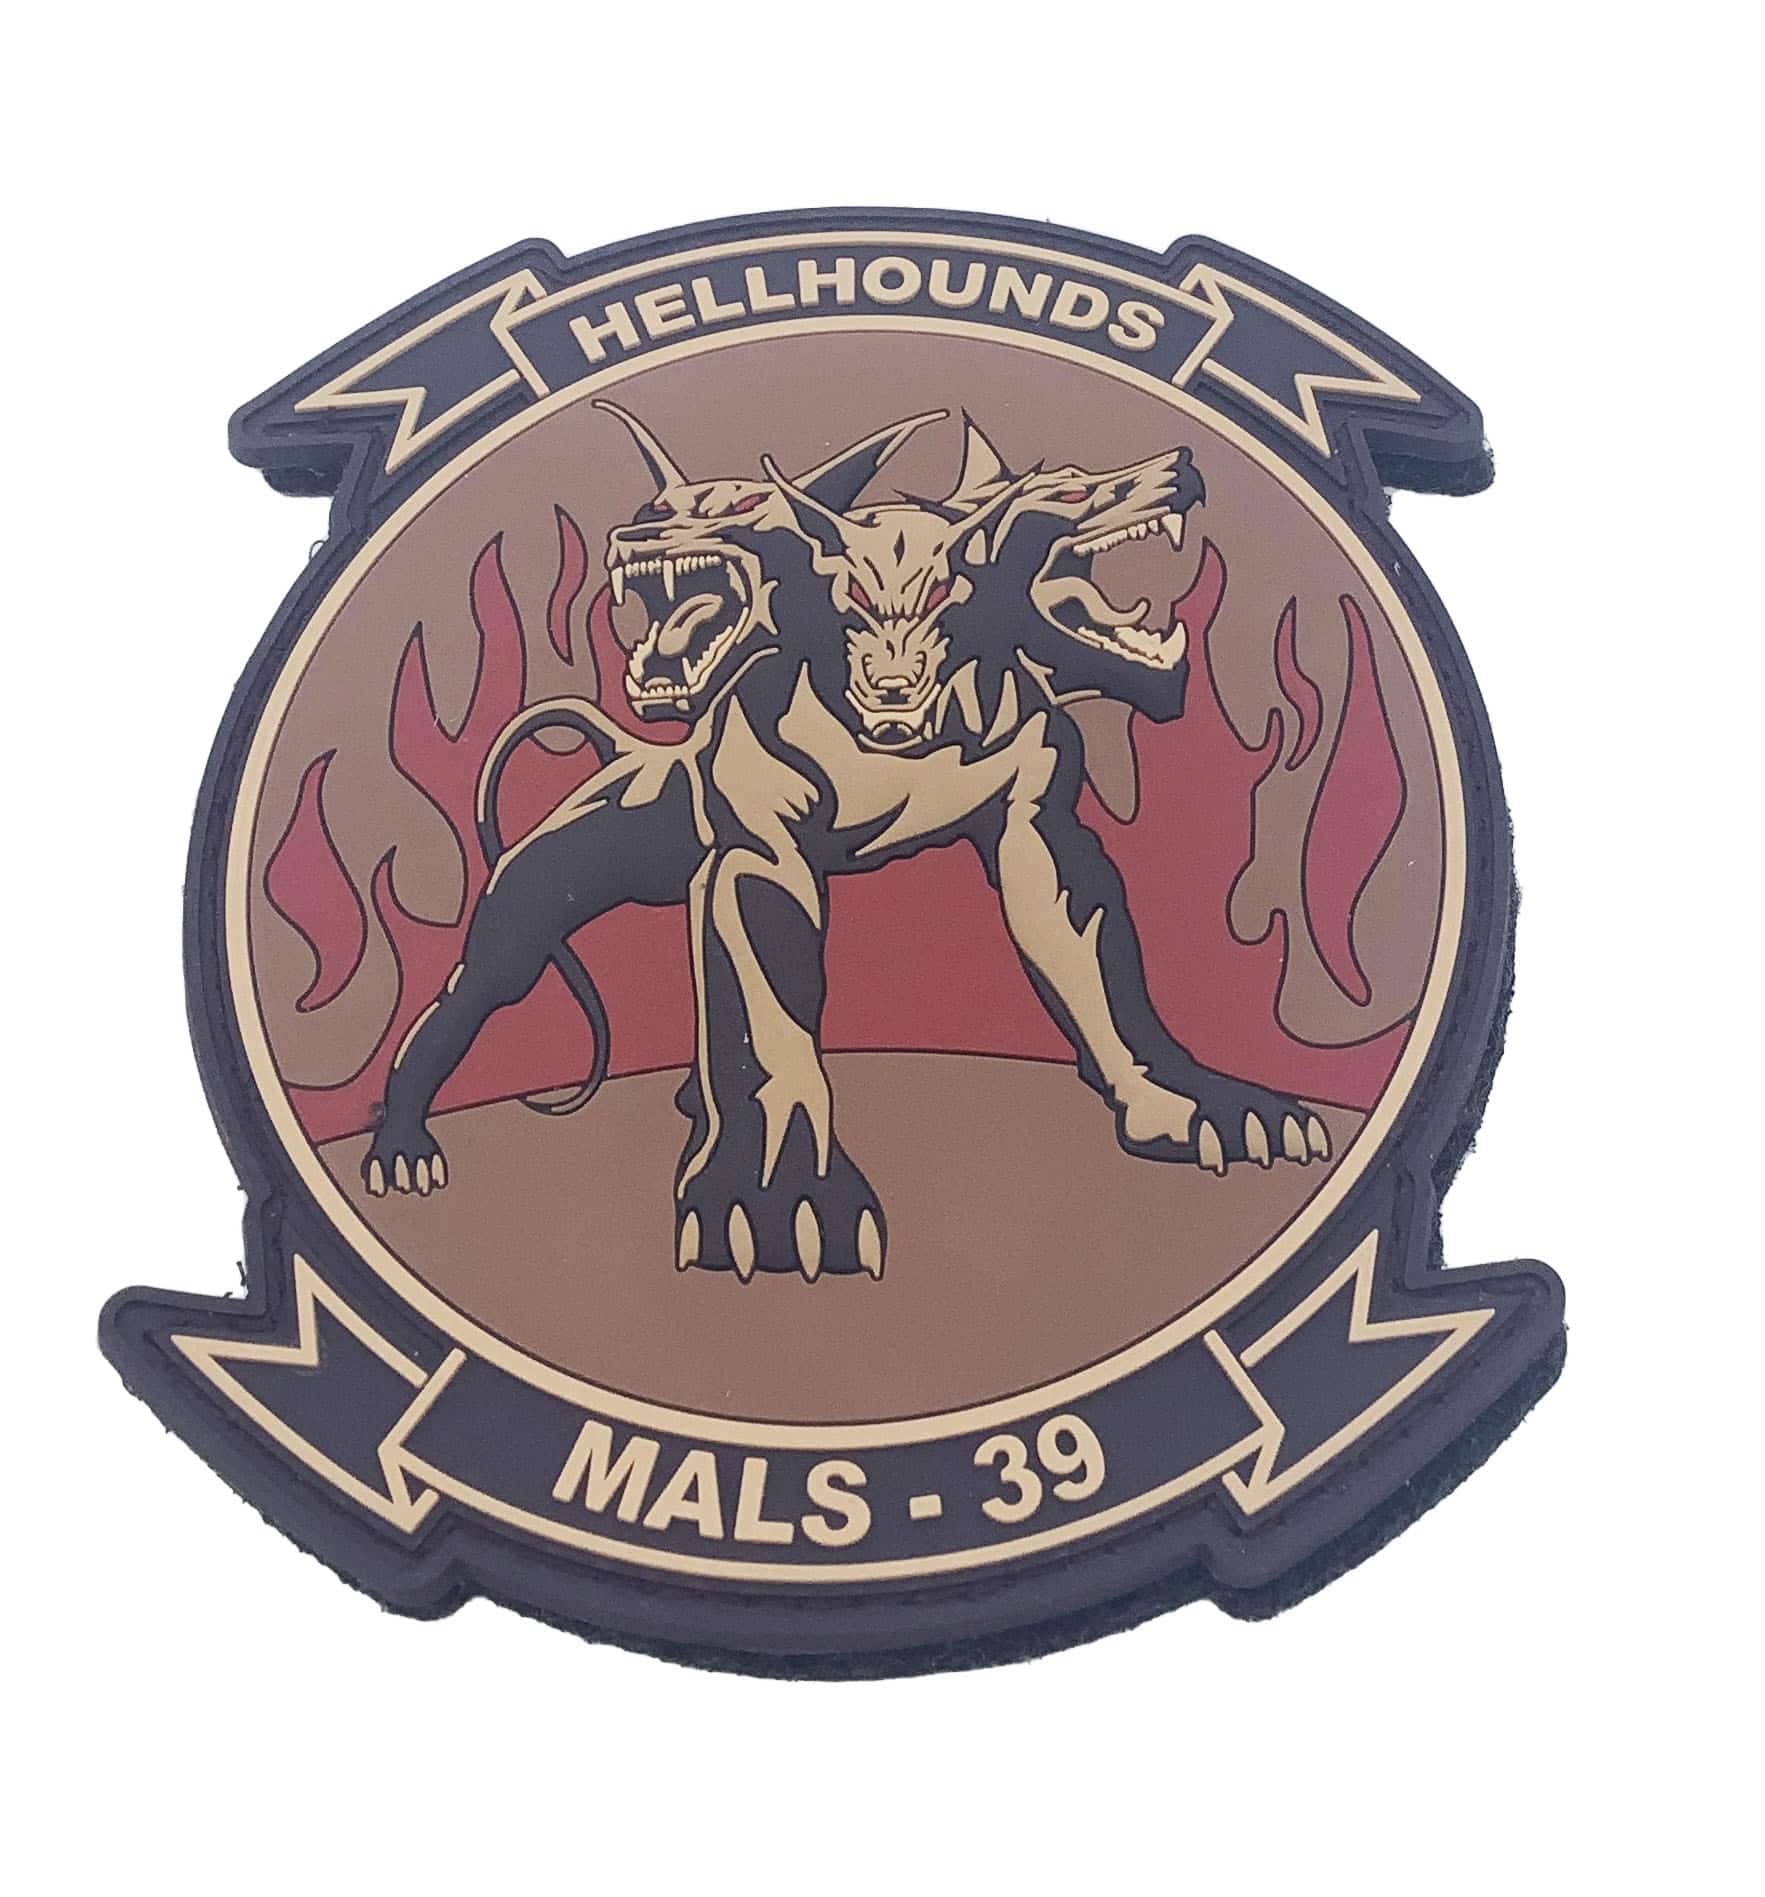 MALS-39 Hellhounds Tan PVC Patch - With Hook and Loop